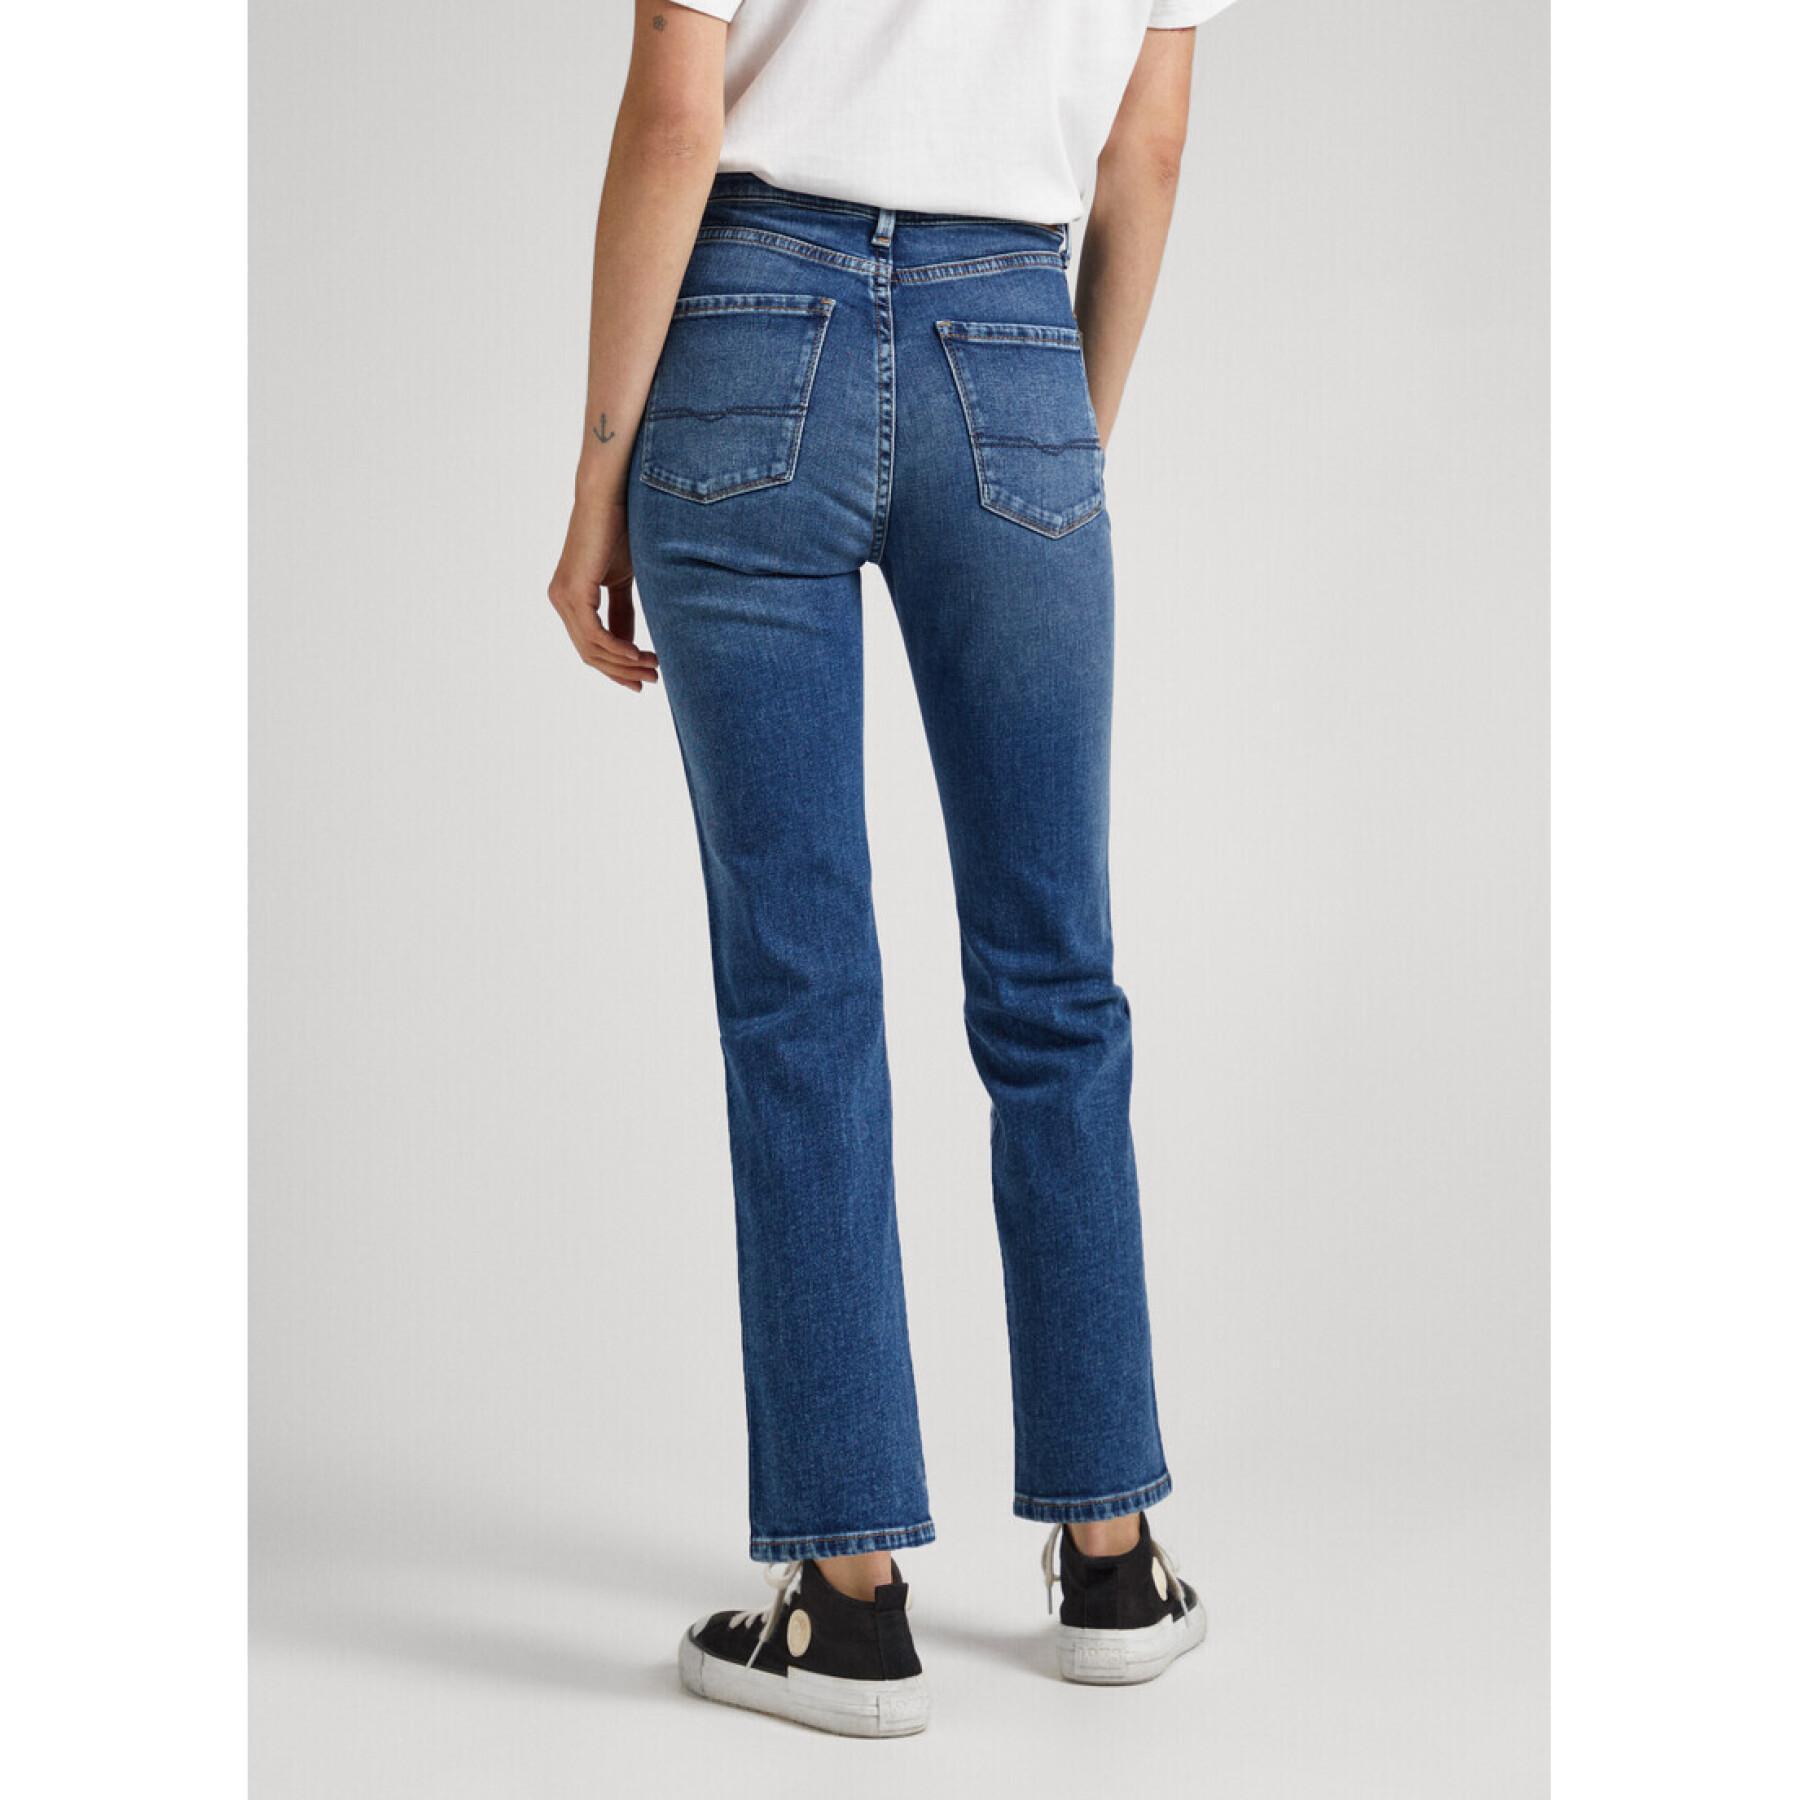 Women's jeans Pepe Jeans Dion 7/8